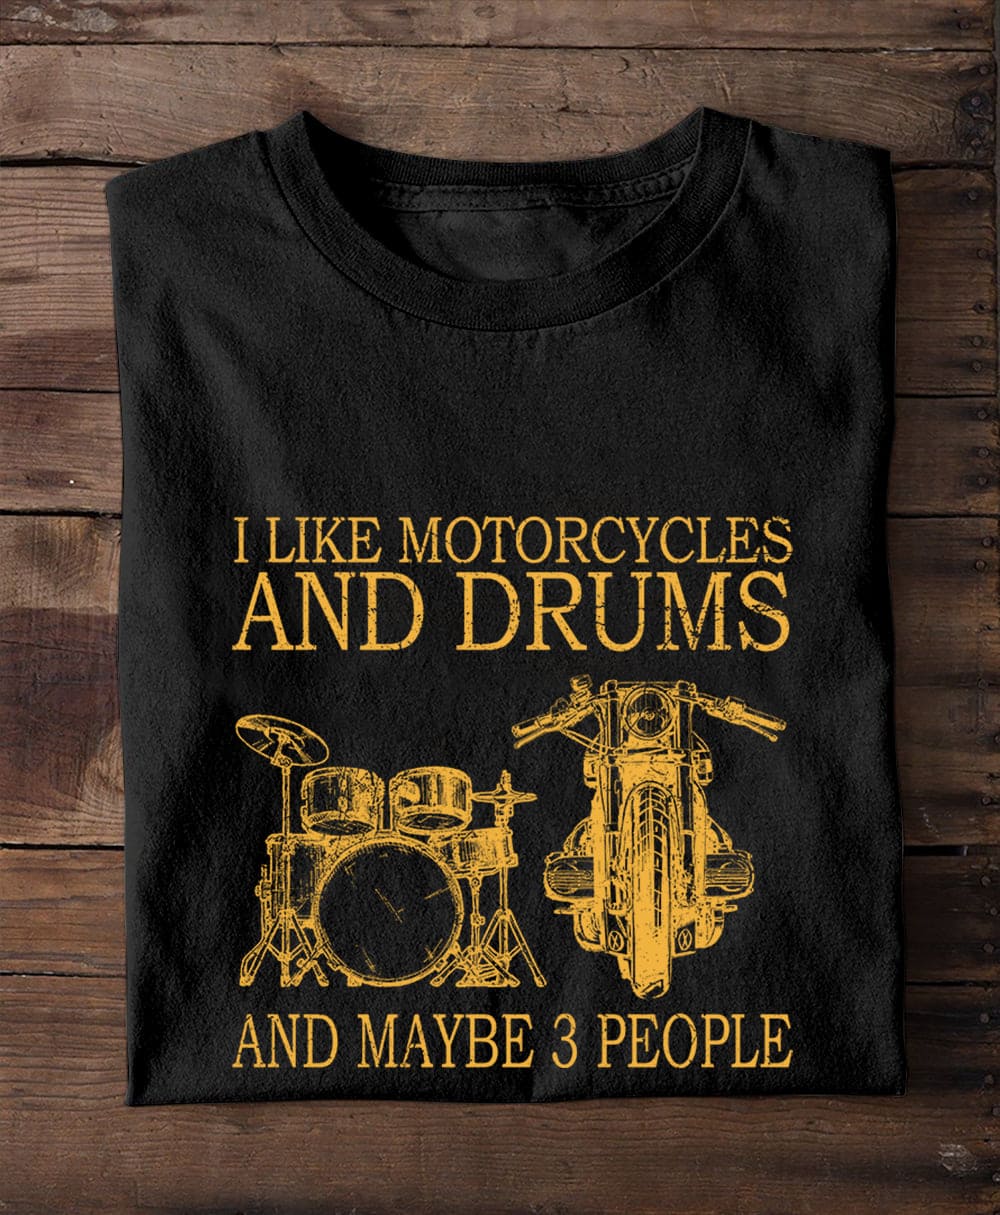 Motorcycles Drums - I like motorcycles and drums and maybe 3 people